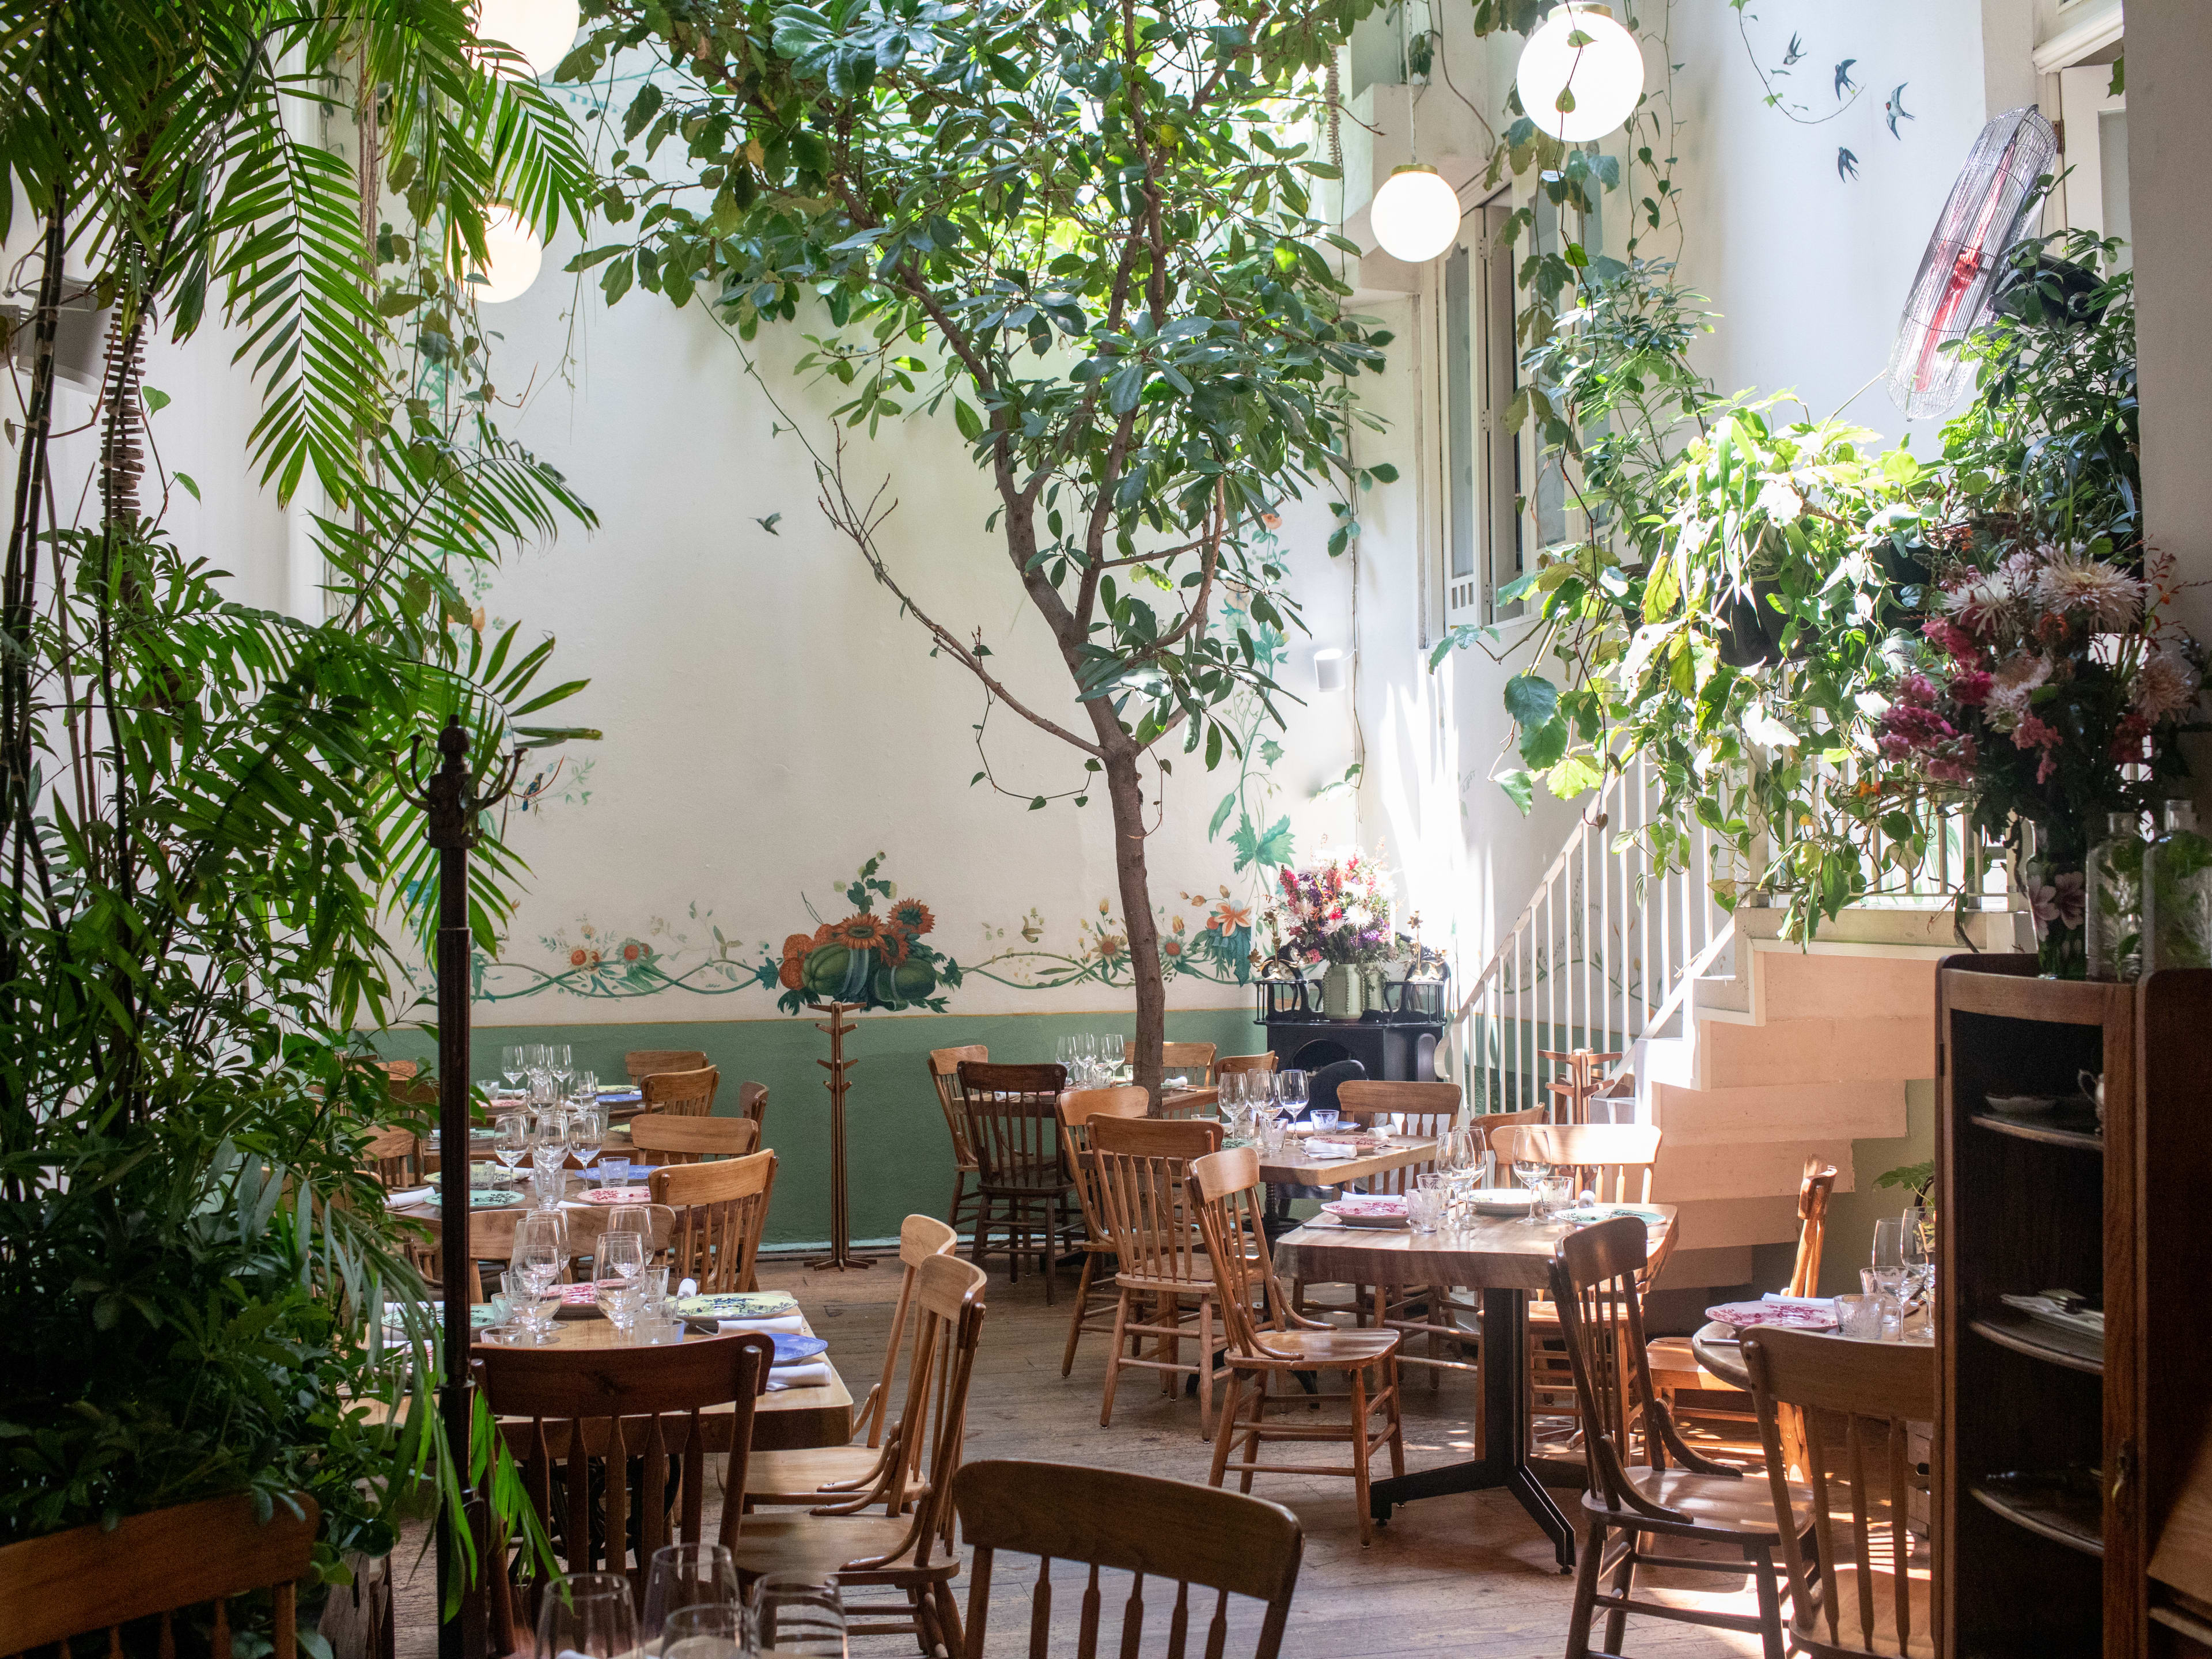 The interior of Rosetta in CDMX with plants.